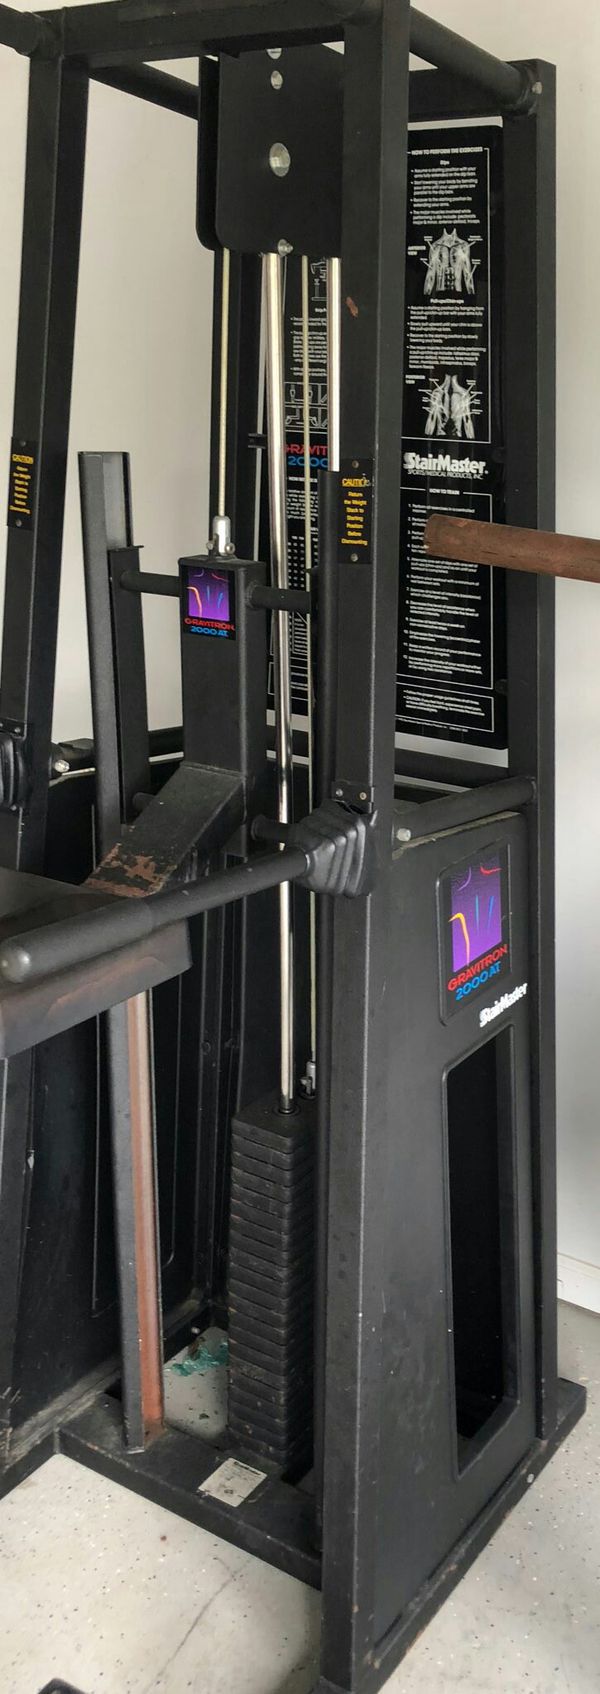 15 Minute The Gravitron Workout Machine for Gym